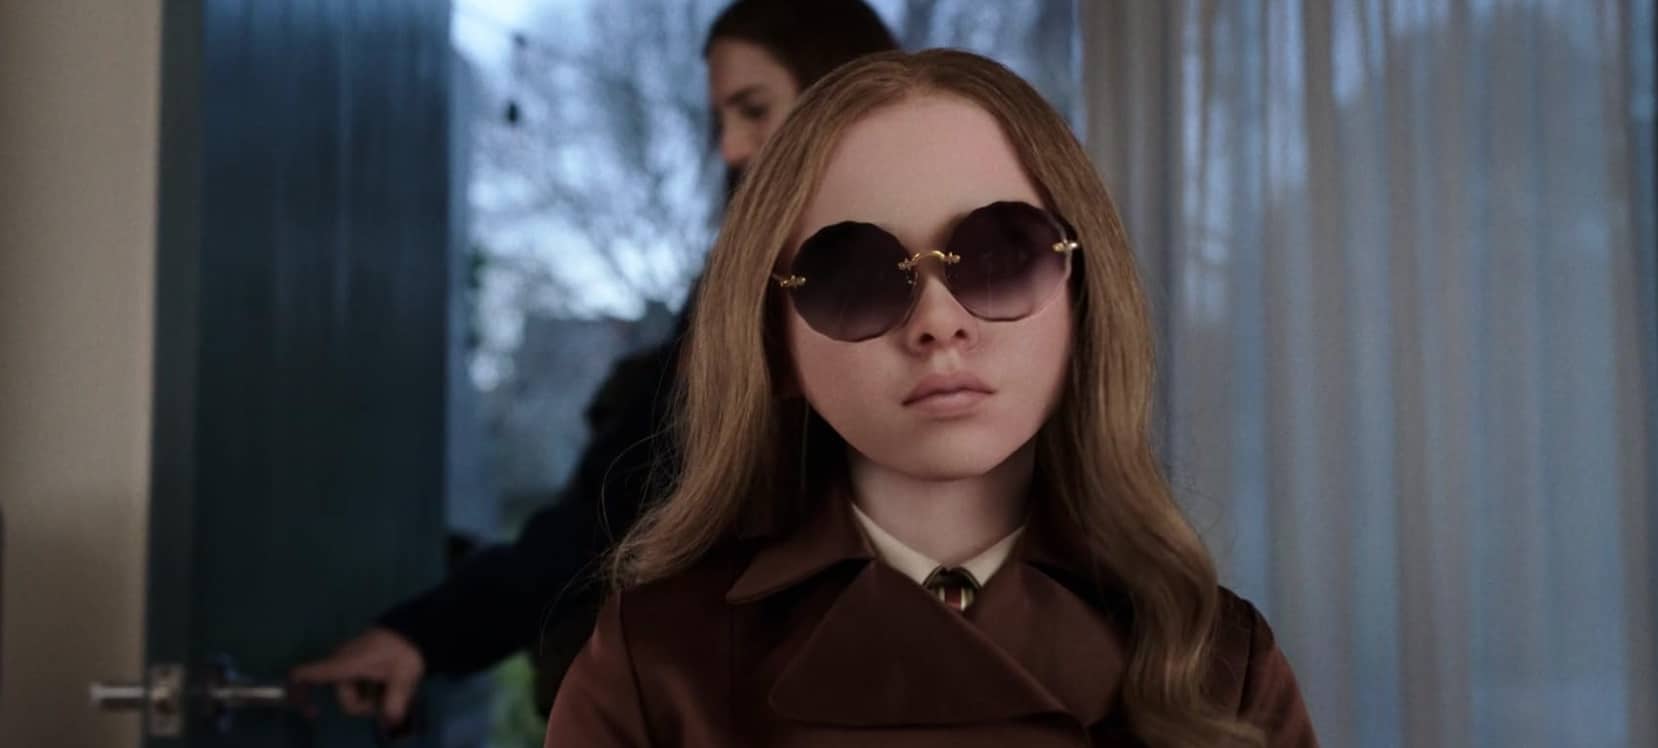 A doll stands in a doorway wearing sunglasses in this image from Universal Pictures.